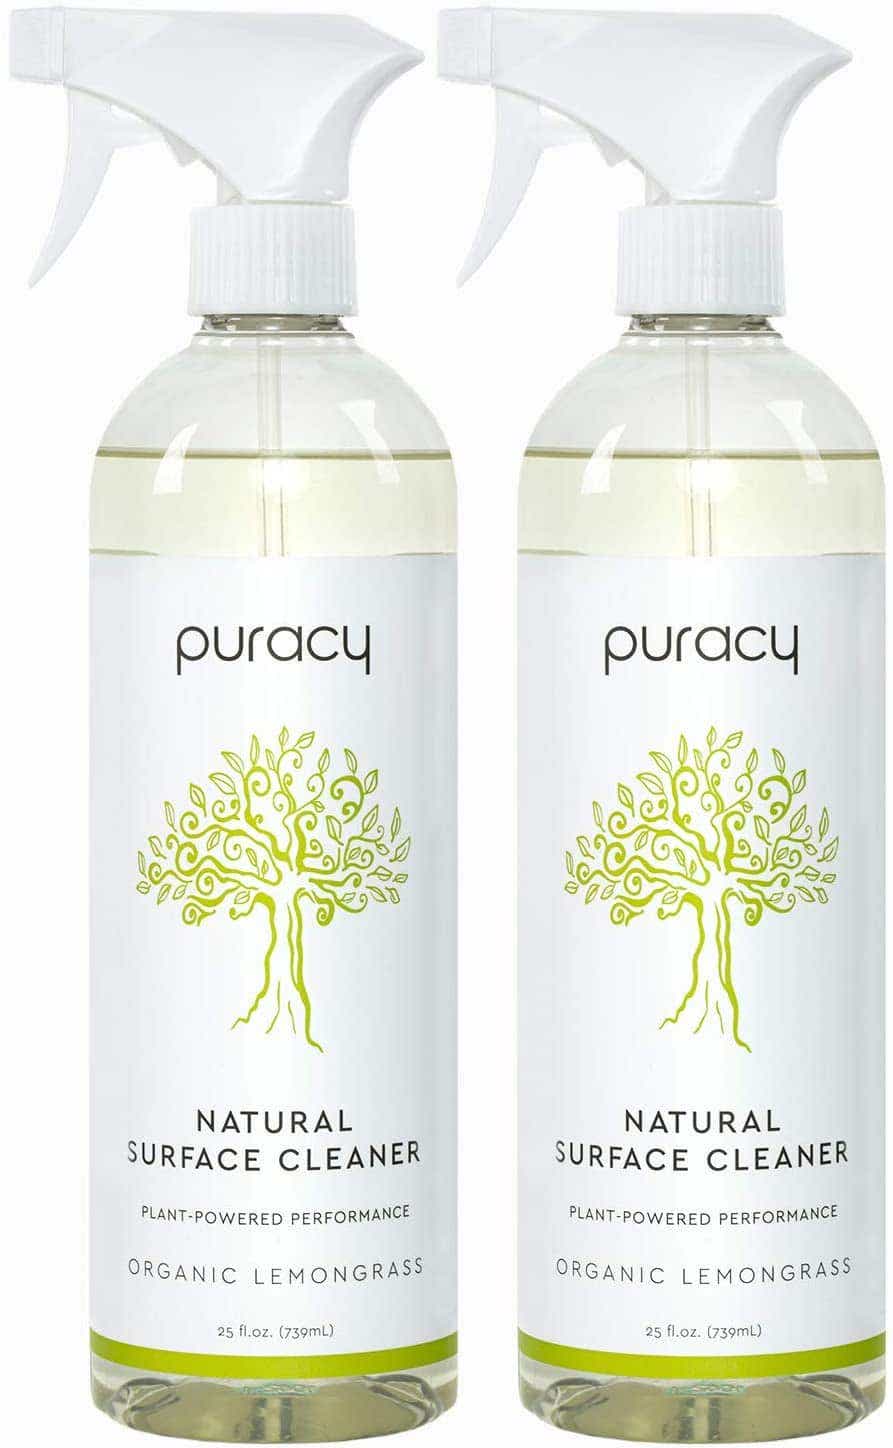 Puracy Natural Surface Cleaner